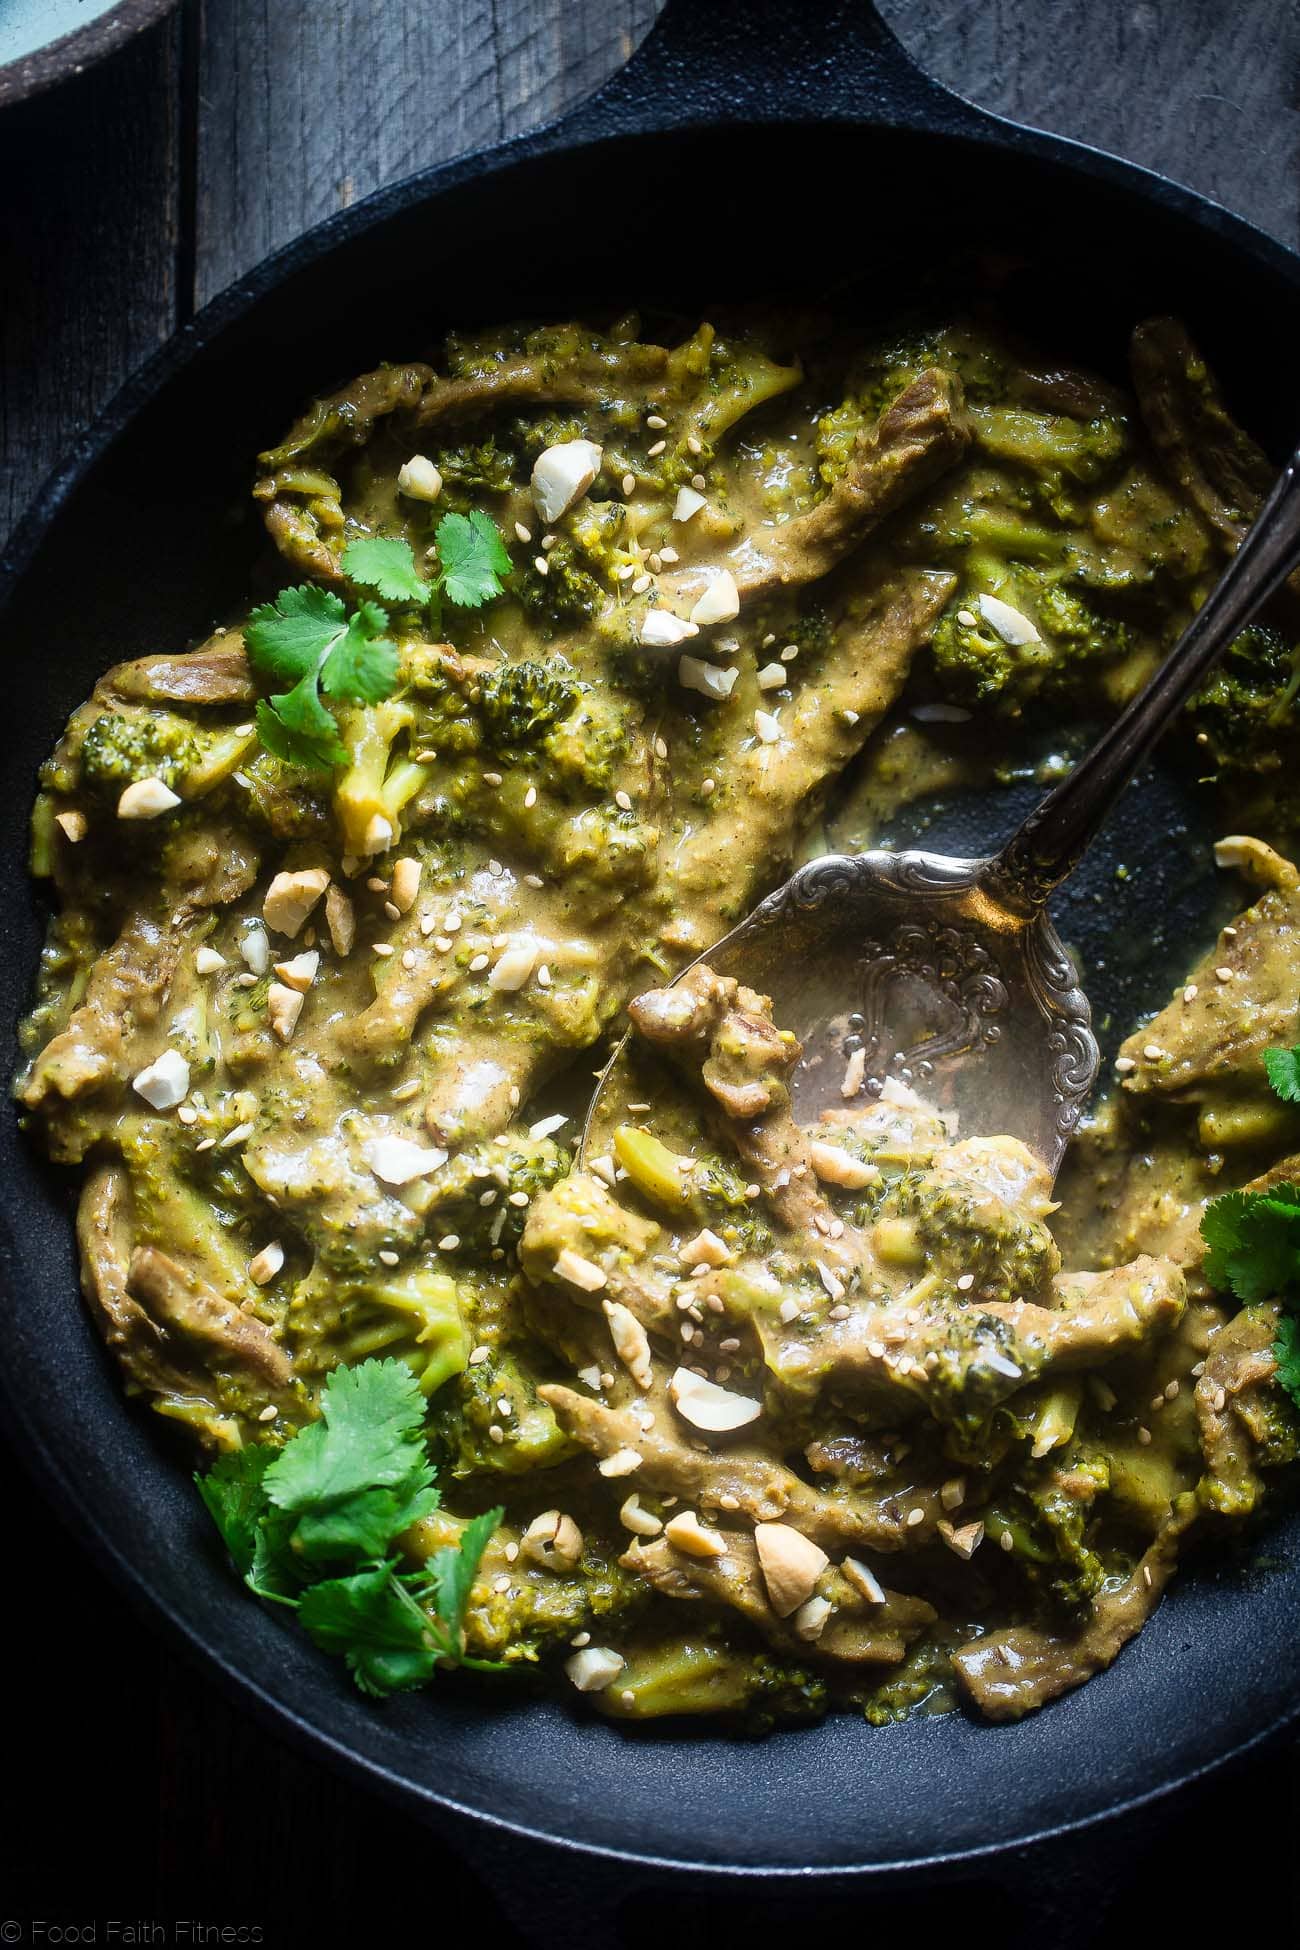 Whole30 Cashew Curry Beef and Broccoli - This quick and easy one pot curry beef and broccoli has creamy coconut milk and cashew butter! It's a healthy, low carb and whole30 approved weeknight meal! | Foodfaithfitness.com | @FoodFaithFit